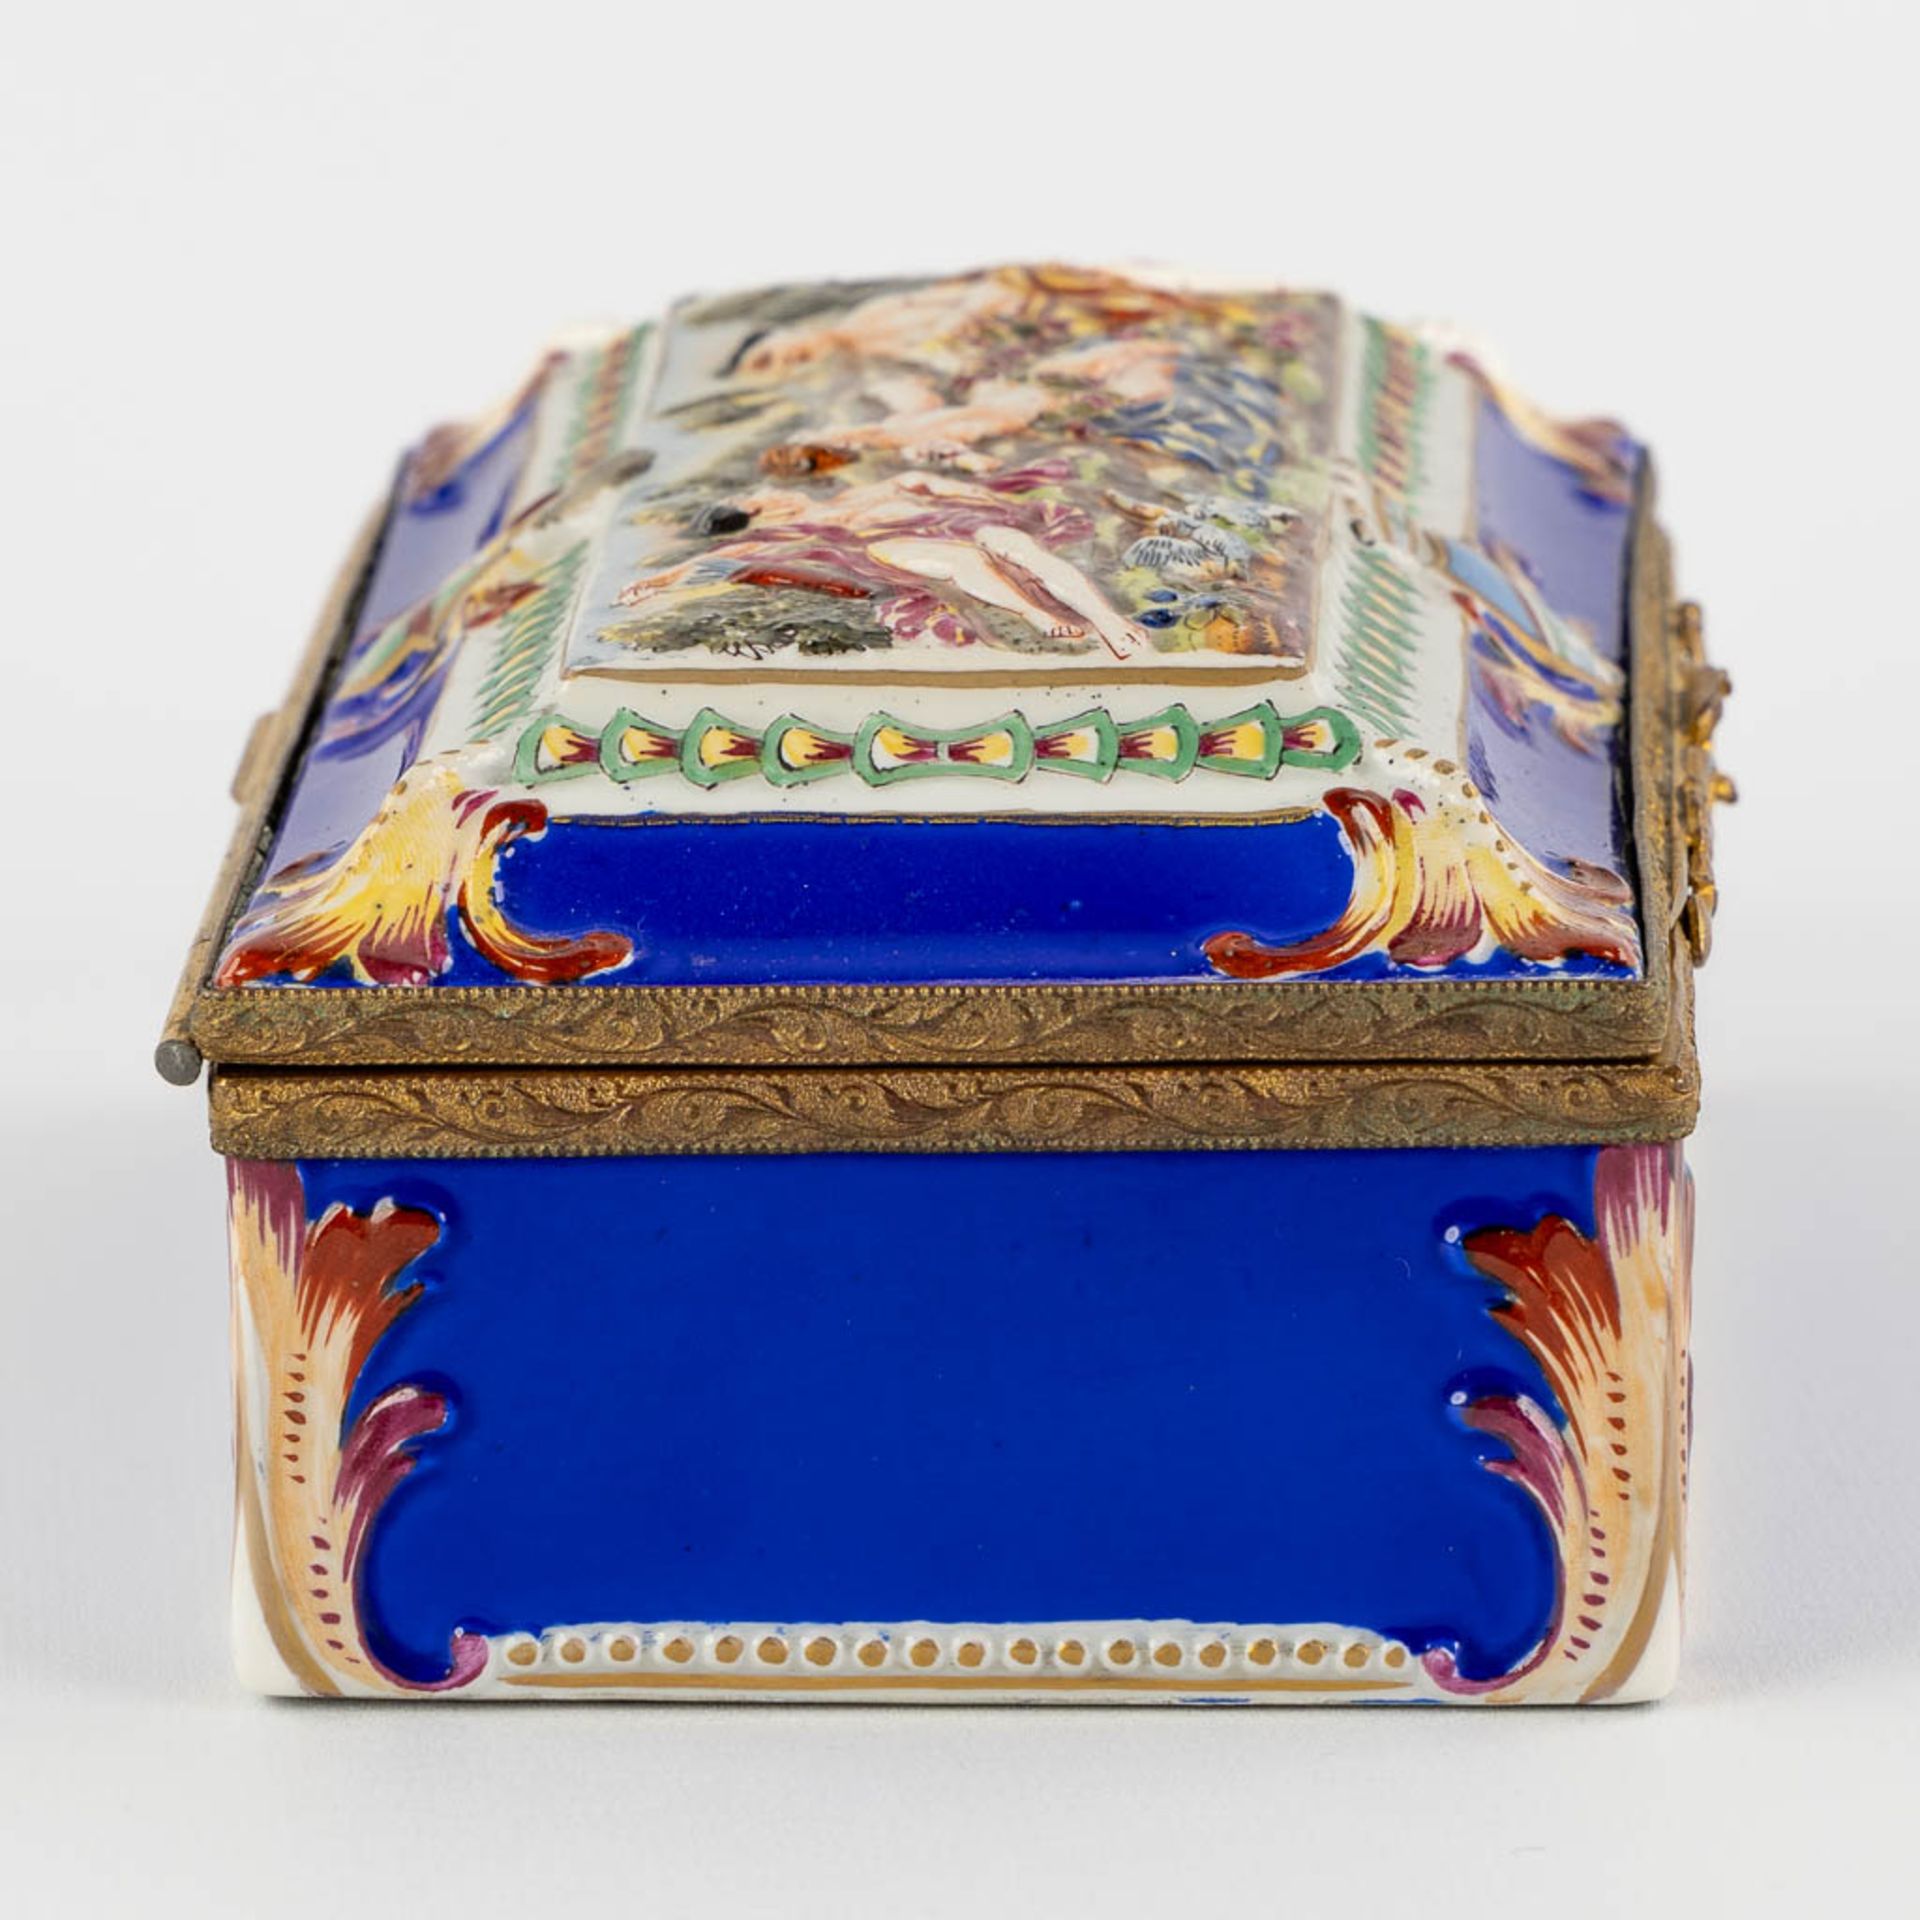 Capodimonte, a finely made porcelain jewellery box. 19th C. (L:10 x W:19 x H:7 cm) - Image 7 of 12